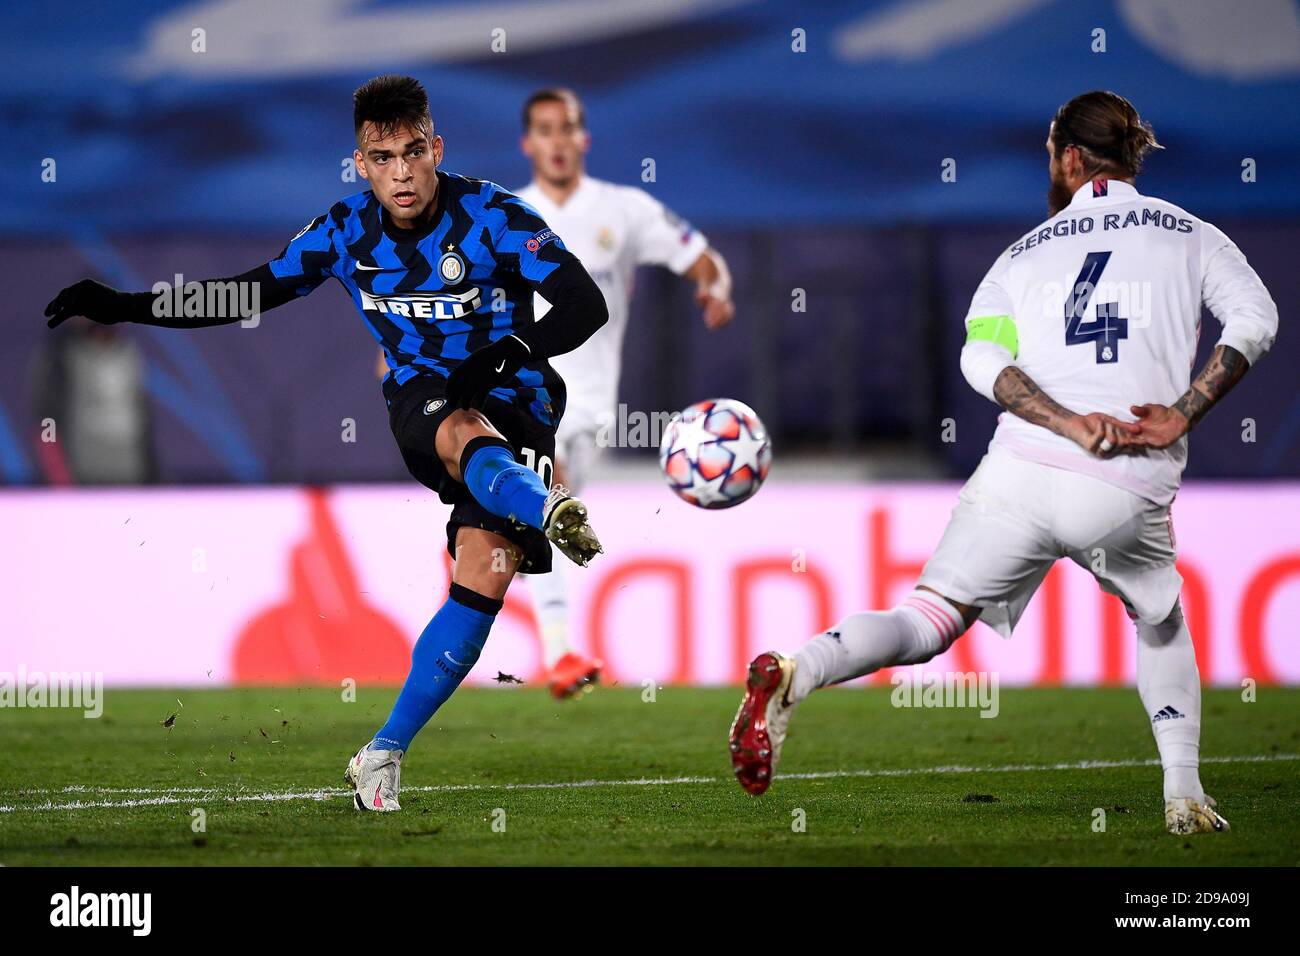 Madrid, Spain. 03rd Nov, 2020. MADRID, SPAIN - November 03, 2020: Lautaro Martinez (L) of FC Internazionale is challenged by Sergio Ramos of Real Madrid CF during the Champions League Group B football match between Real Madrid CF and FC Internazionale. Real Madrid CF won 3-2 over FC Internazionale. (Photo by Nicolò Campo/Sipa USA) Credit: Sipa USA/Alamy Live News Stock Photo